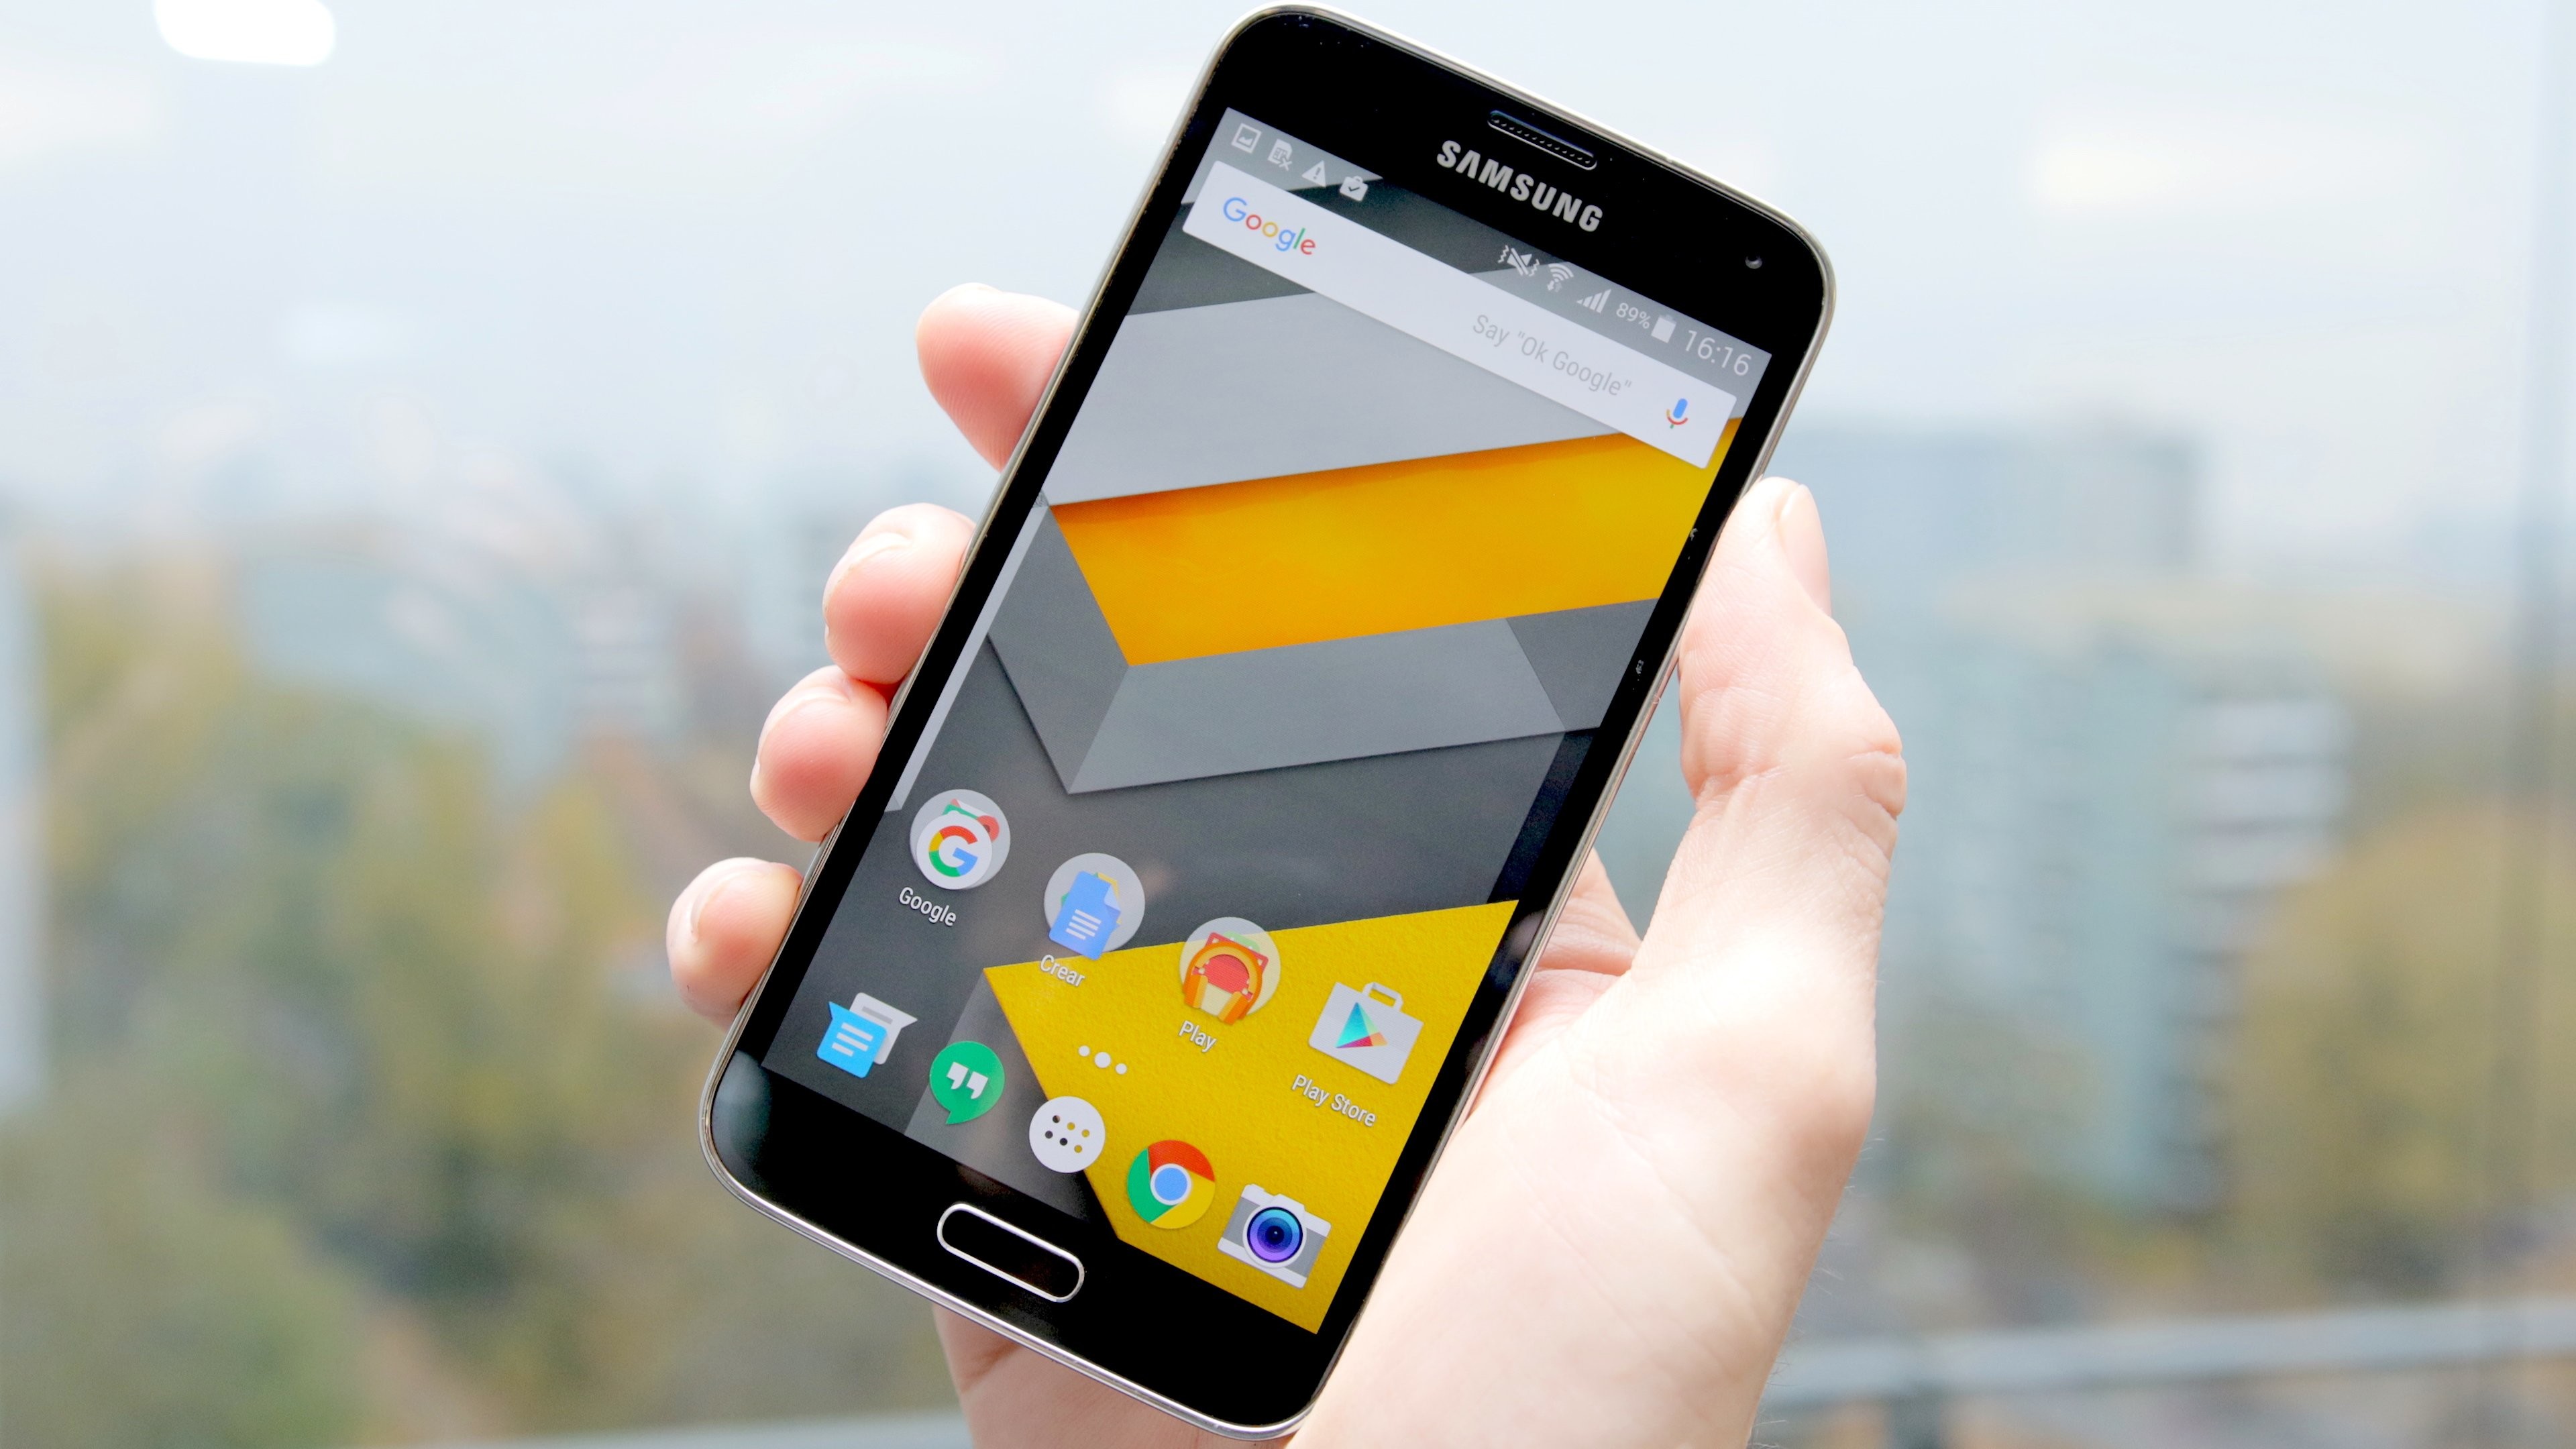 3840x2160 Samsung Galaxy S5 Android update: latest news